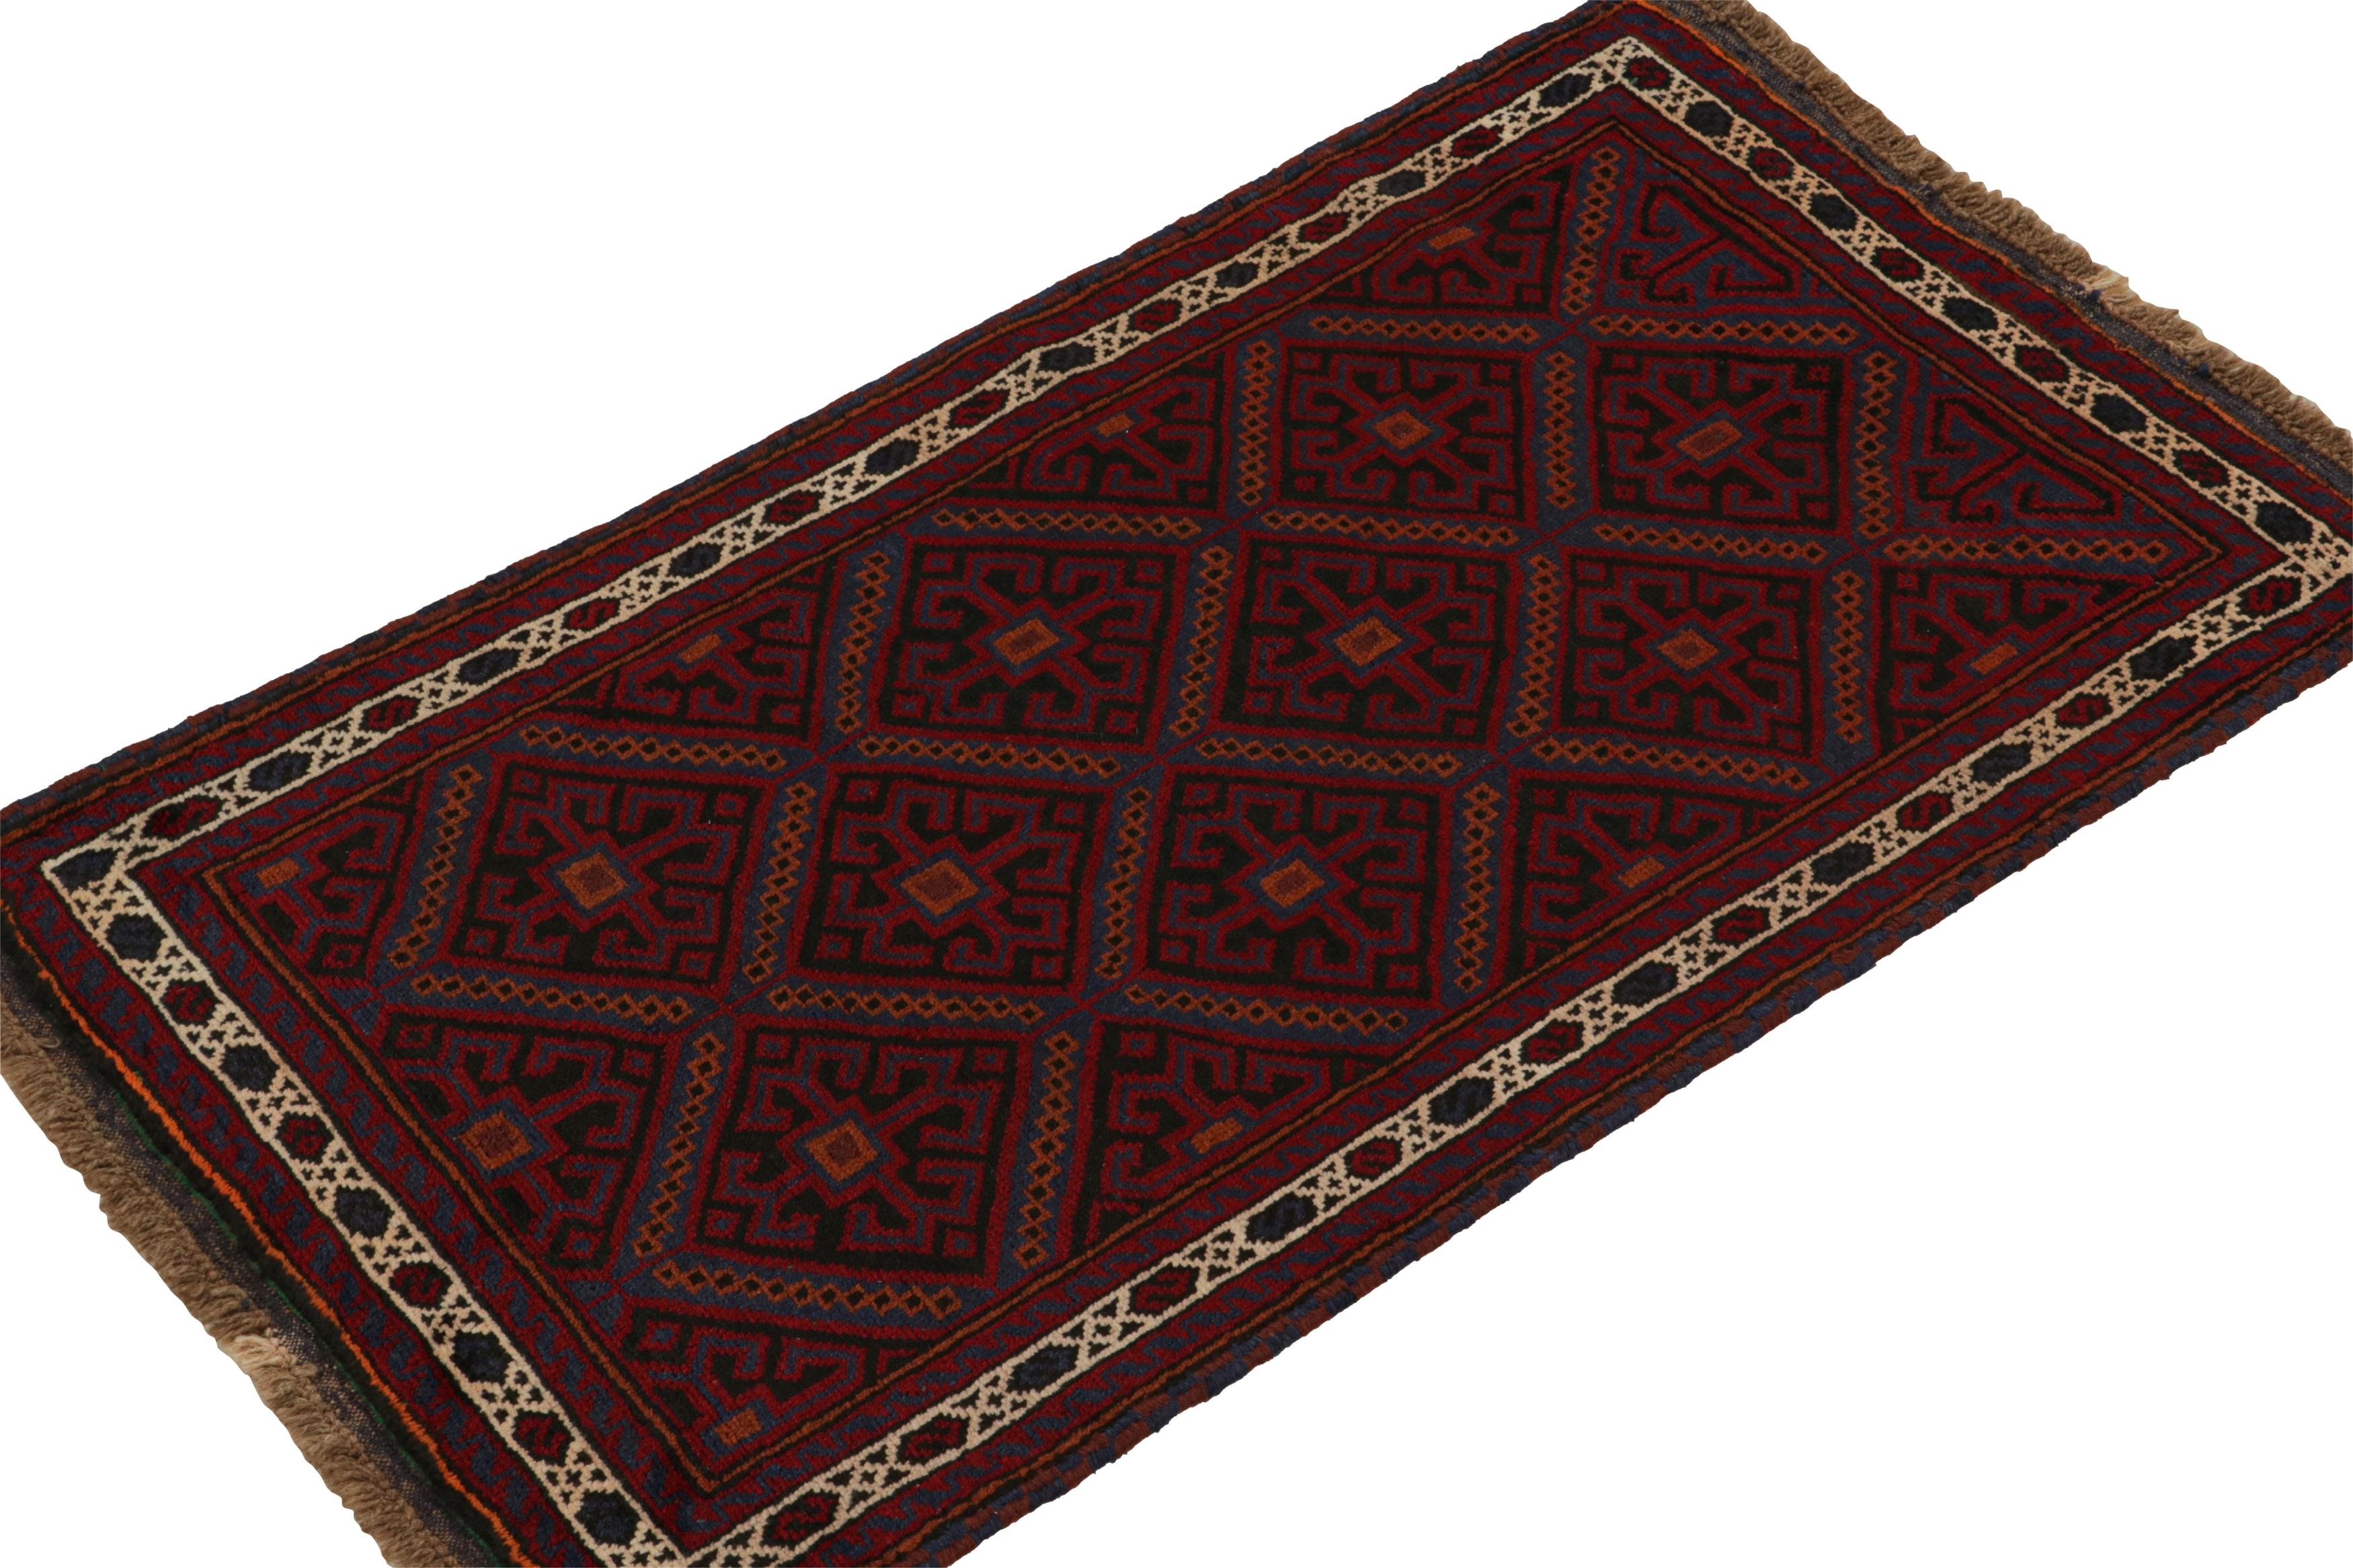 Hand-knotted in wool, this 3x4 Baluch Persian rug of the 1950s is the latest to enter Rug & Kilim’s Antique & Vintage collection.

On the Design:

The piece carries diamond patterns in rich tones of red, blue & black with orange punctuations. The